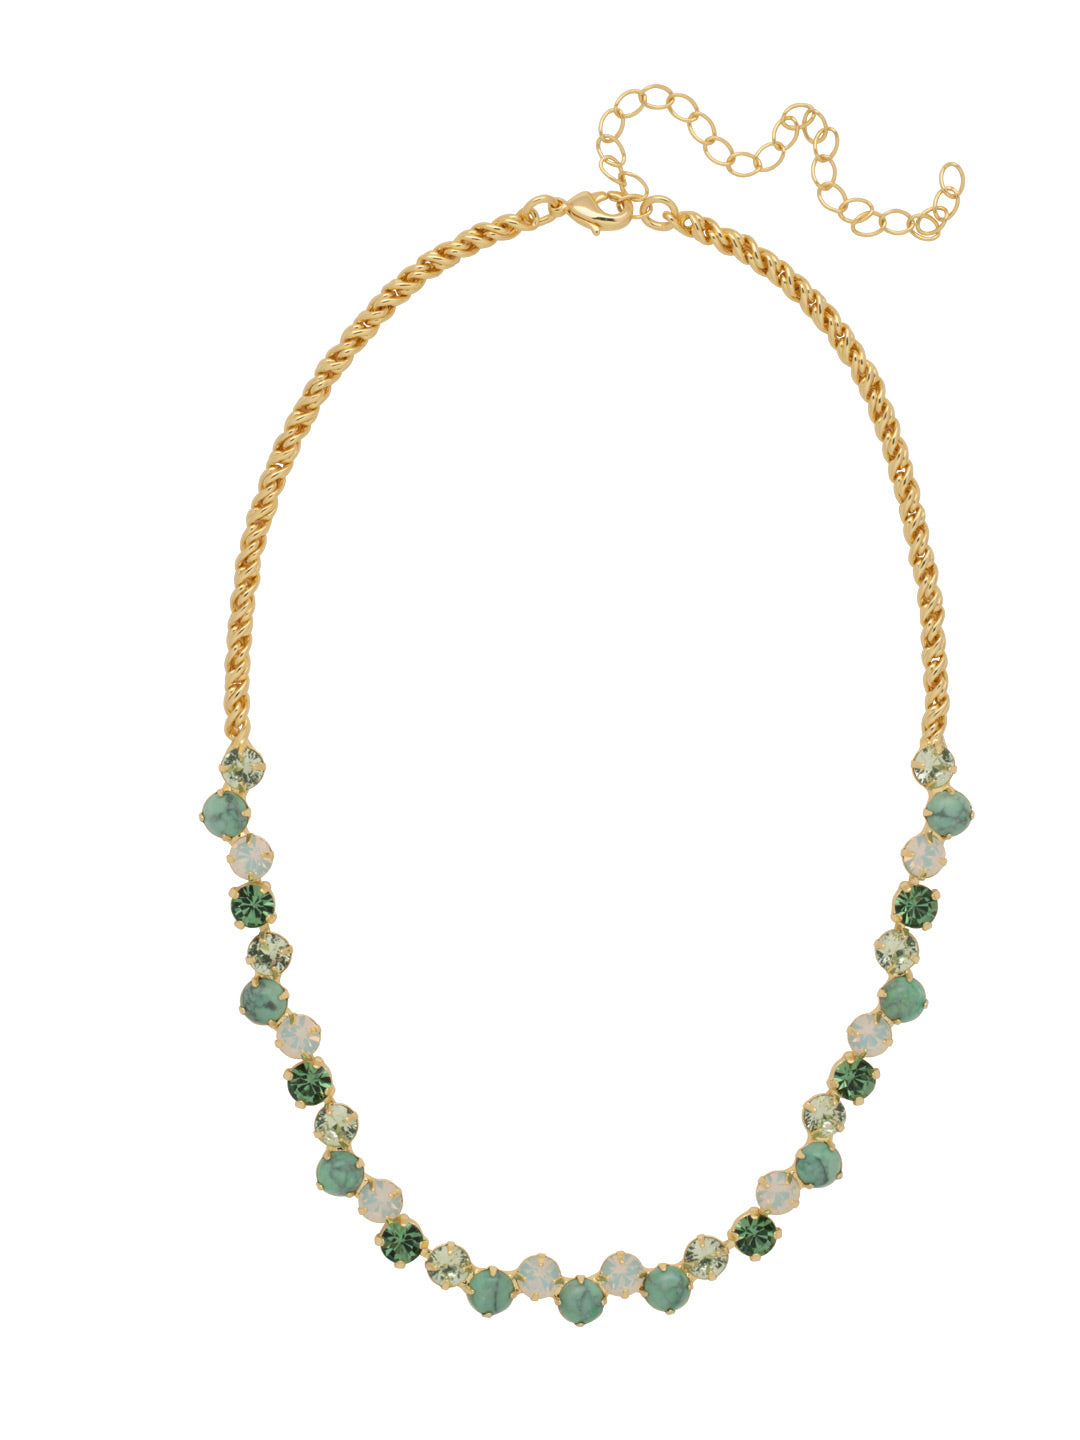 Xena Repeating Rope Chain Tennis Necklace - NFF113BGSGR - <p>The Xena Repeating Rope Chain Tennis Necklace features repeating round cut crystals and semi-precious stones on an adjustable rope chain, secured with a lobster claw clasp. From Sorrelli's Sage Green collection in our Bright Gold-tone finish.</p>